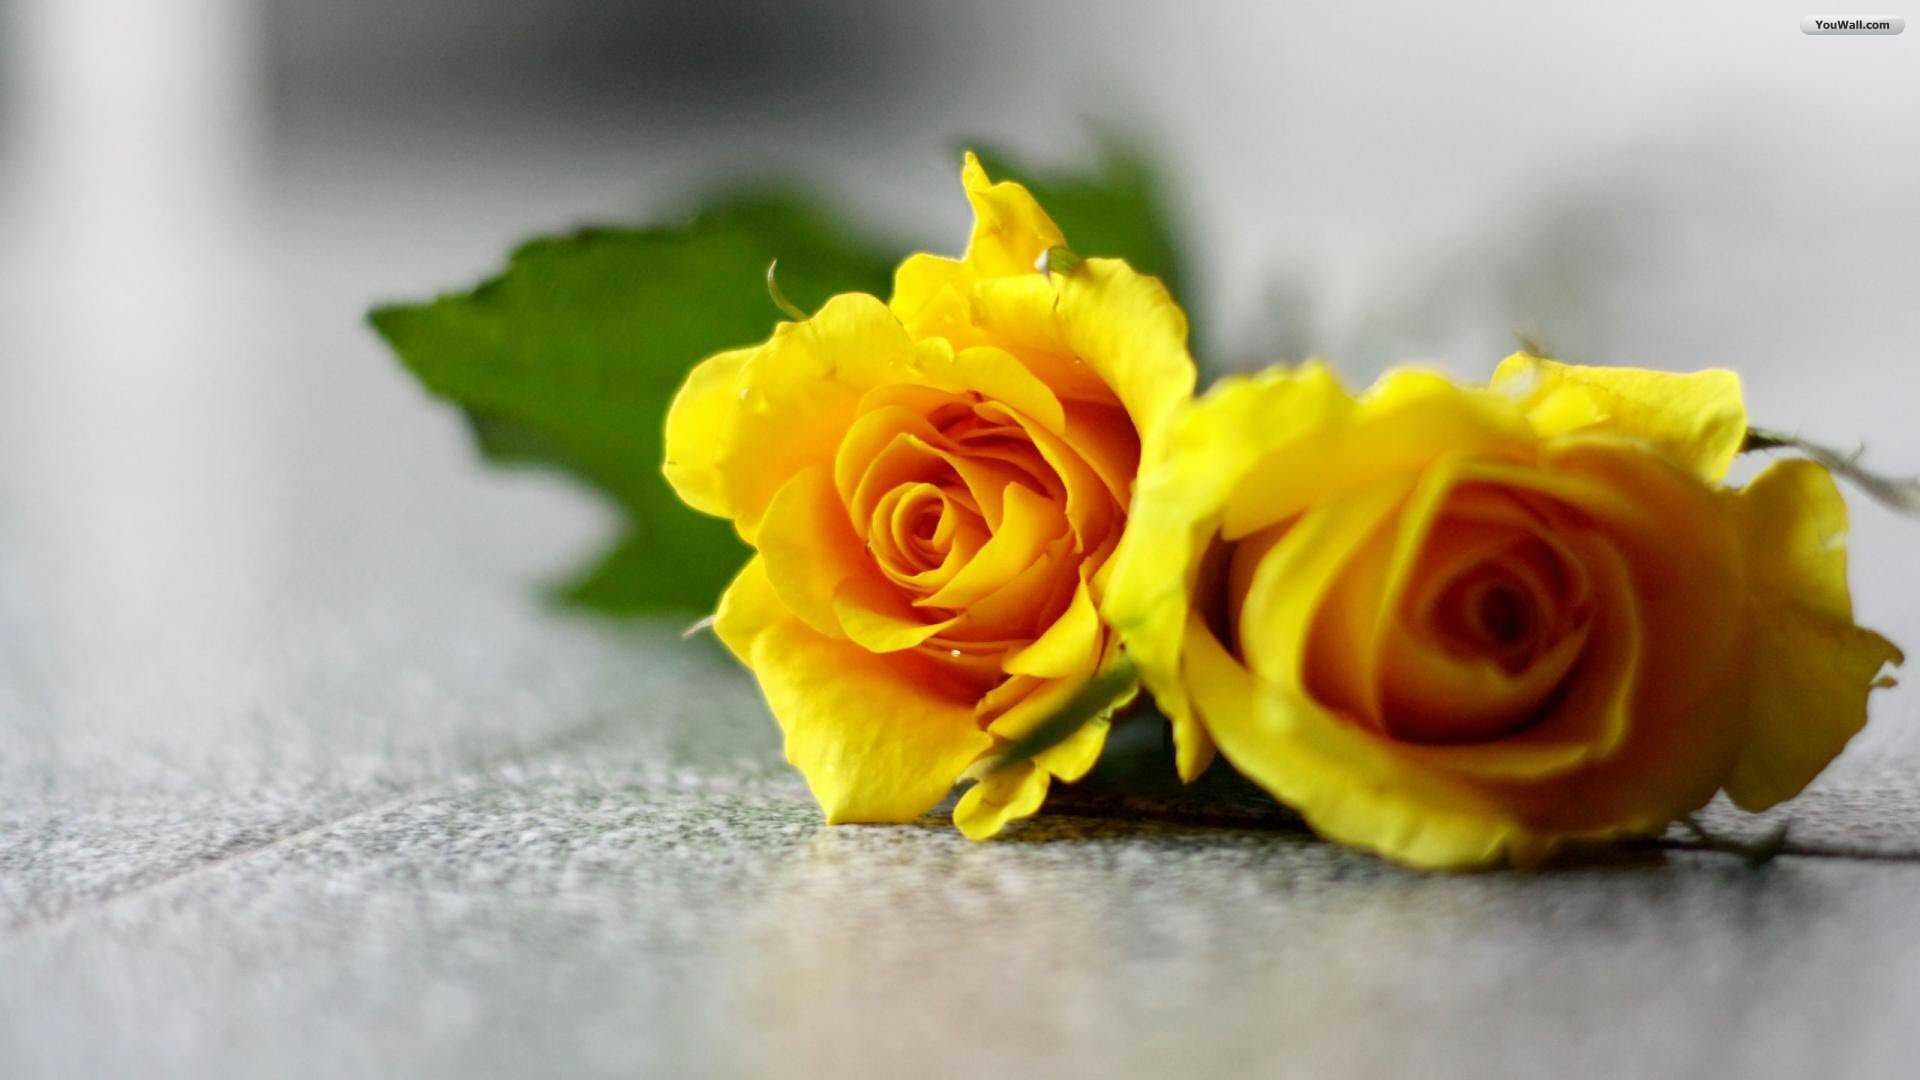 1920x1080, Wallpaper Of Yellow Roses Top Quality Cool - Yellow Roses Wallpaper Hd - HD Wallpaper 